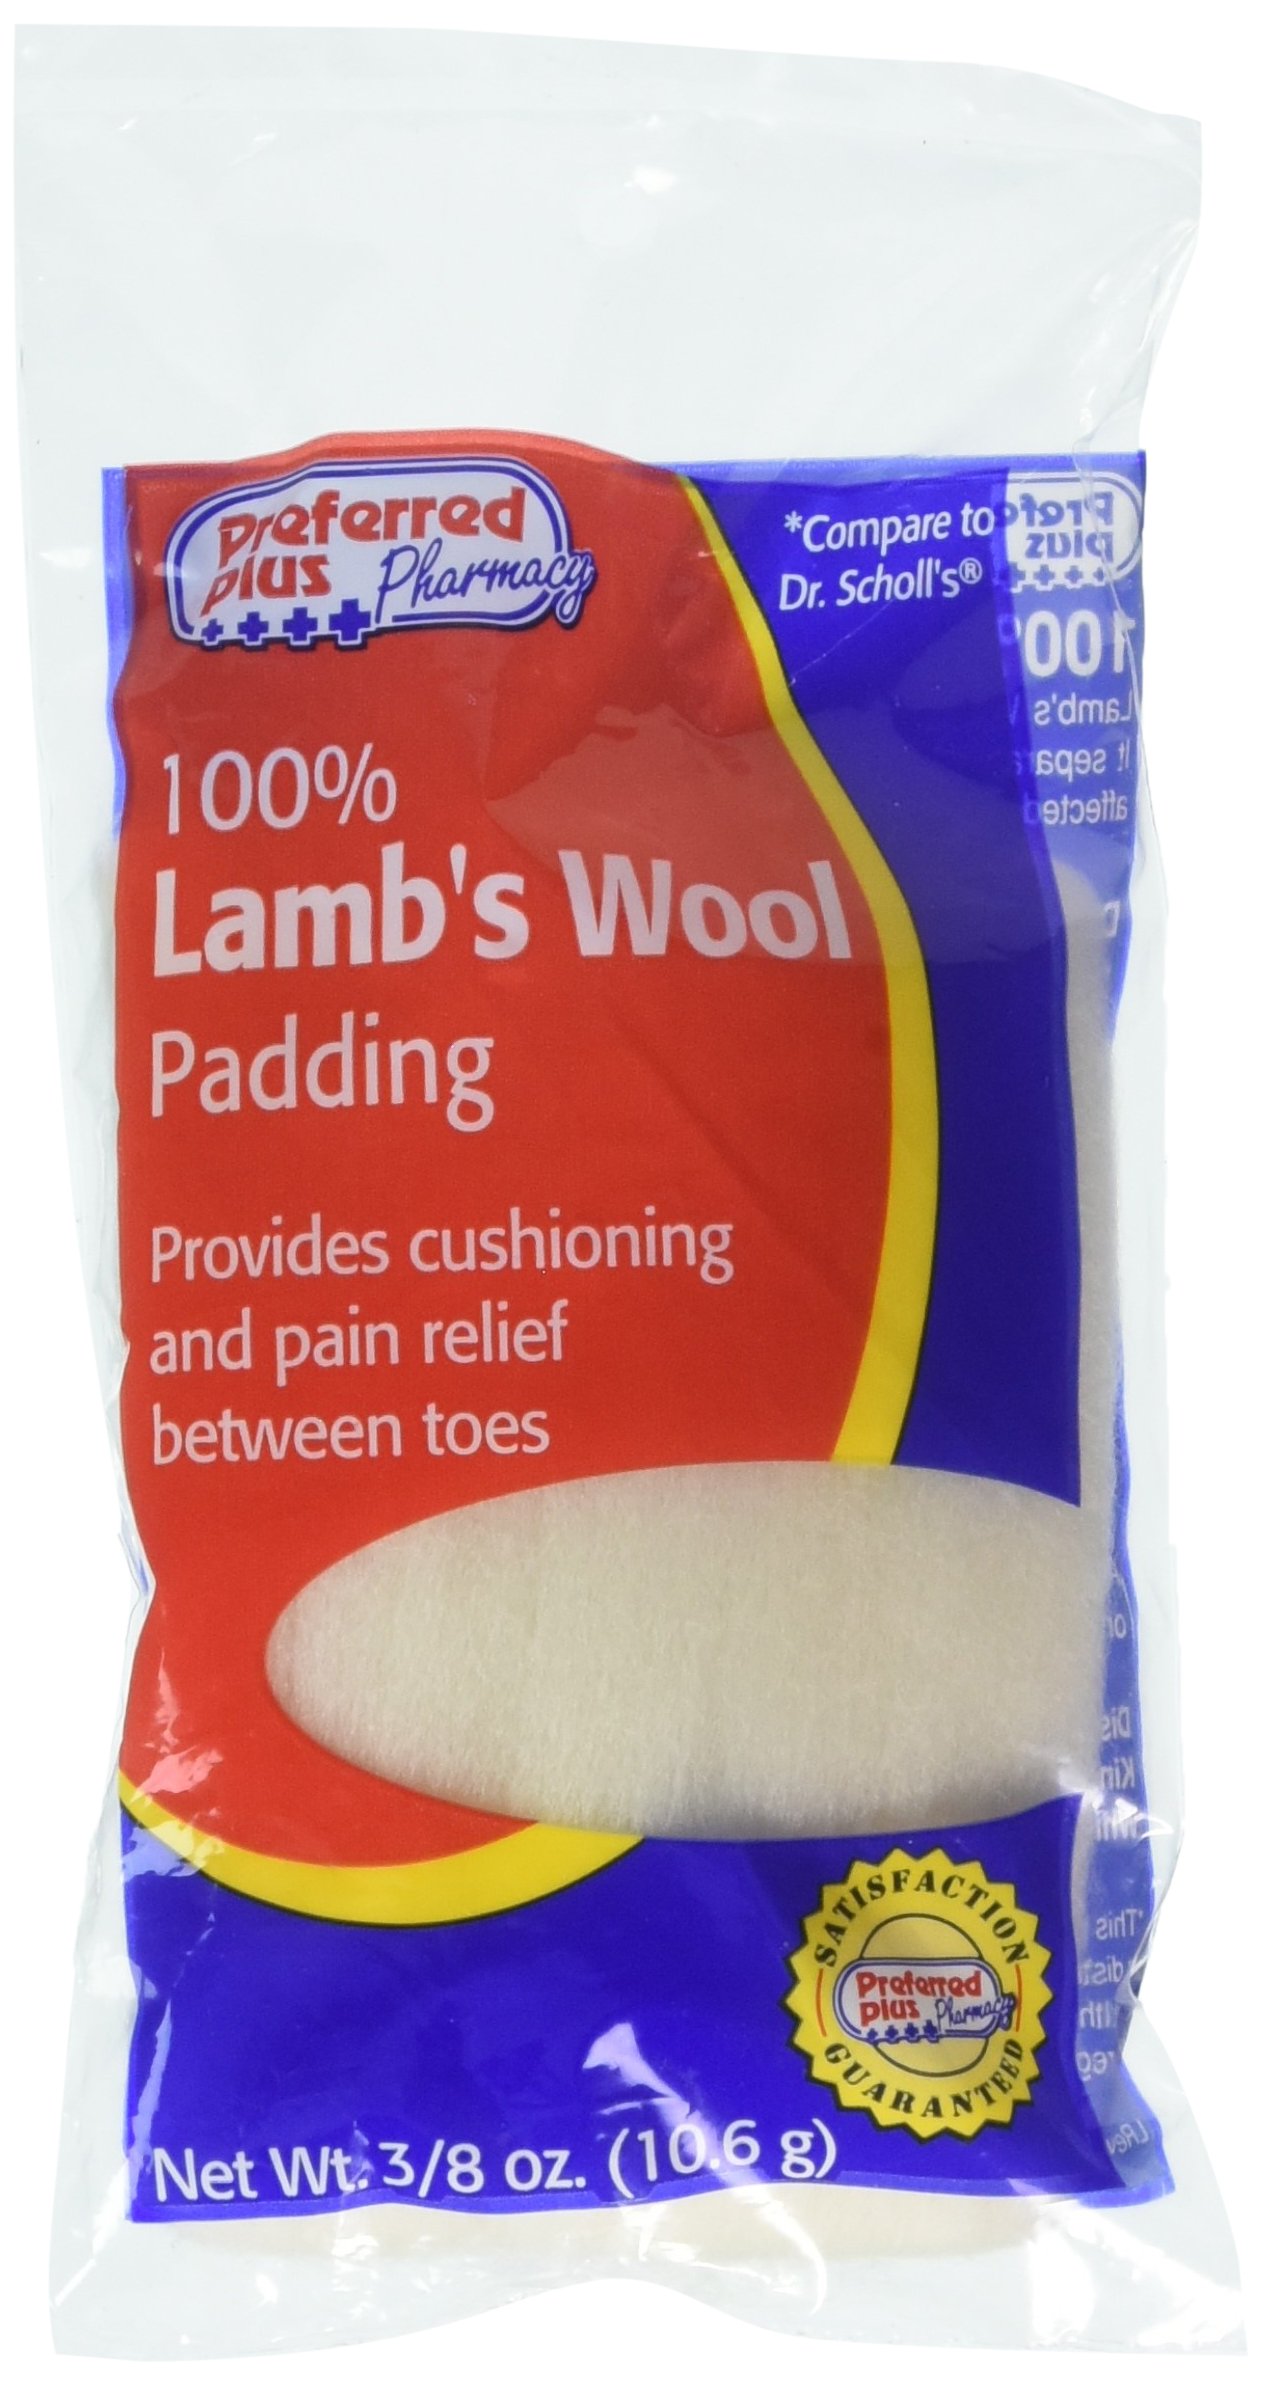 Leader 100% Lambs Wool Padding, Provides Cushioning and Pain Relief 3/8 oz